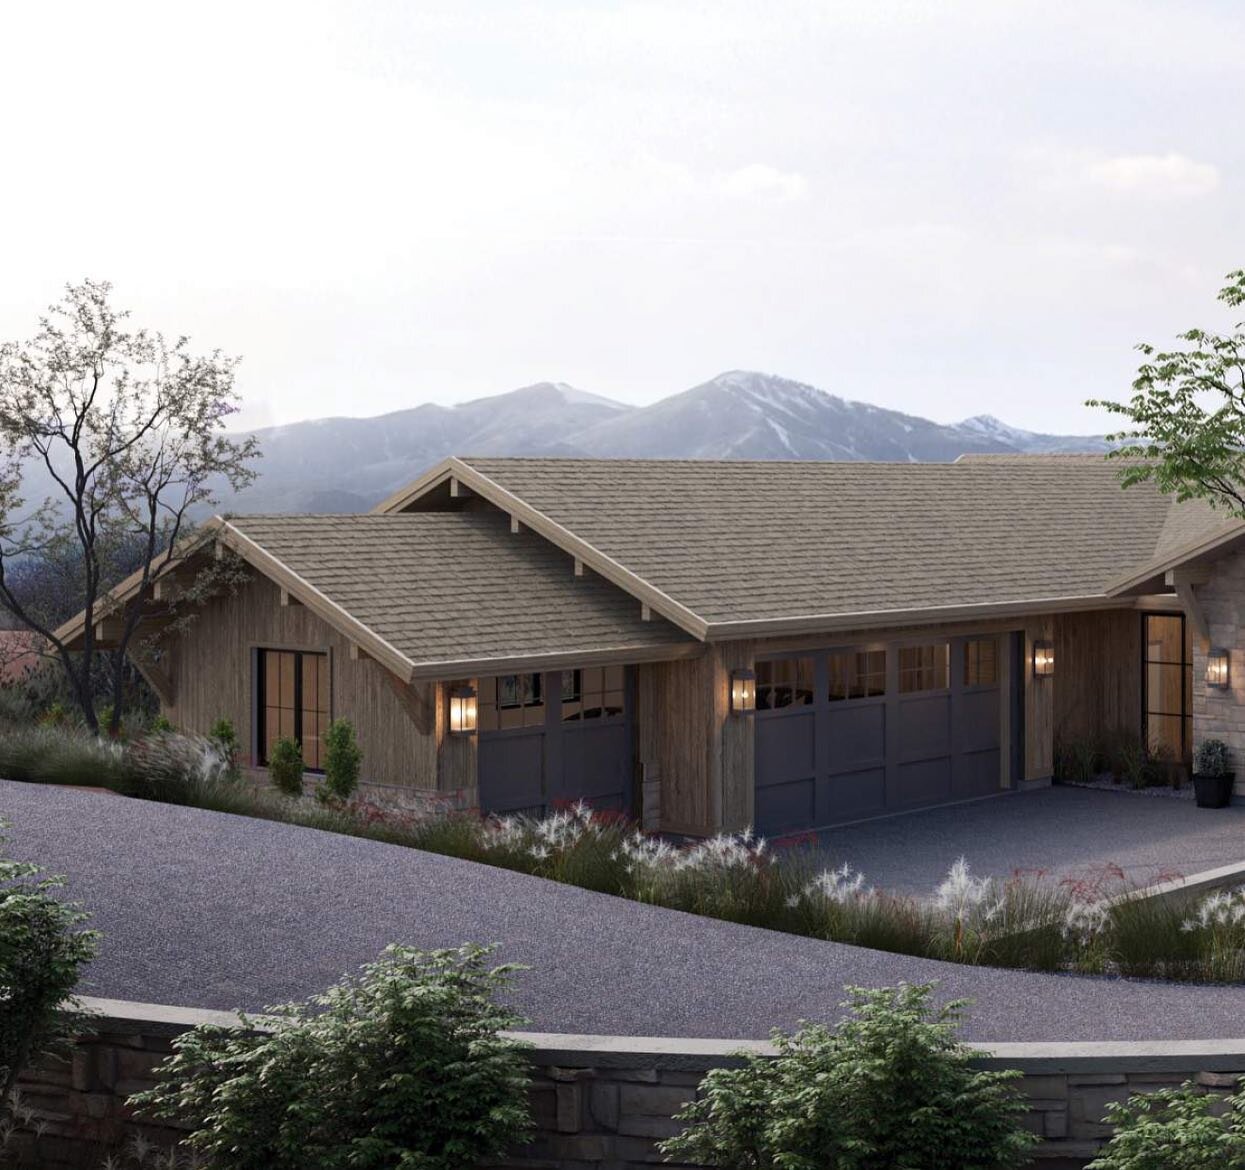 One of three customs mountain homes coming soon. This particular one we designed specifically for our family to call ours and enjoy for many years🤞🏼

#customhomes #residentialdesign #residentialconstruction #mountainhome #parkcity #beautifulhome #m